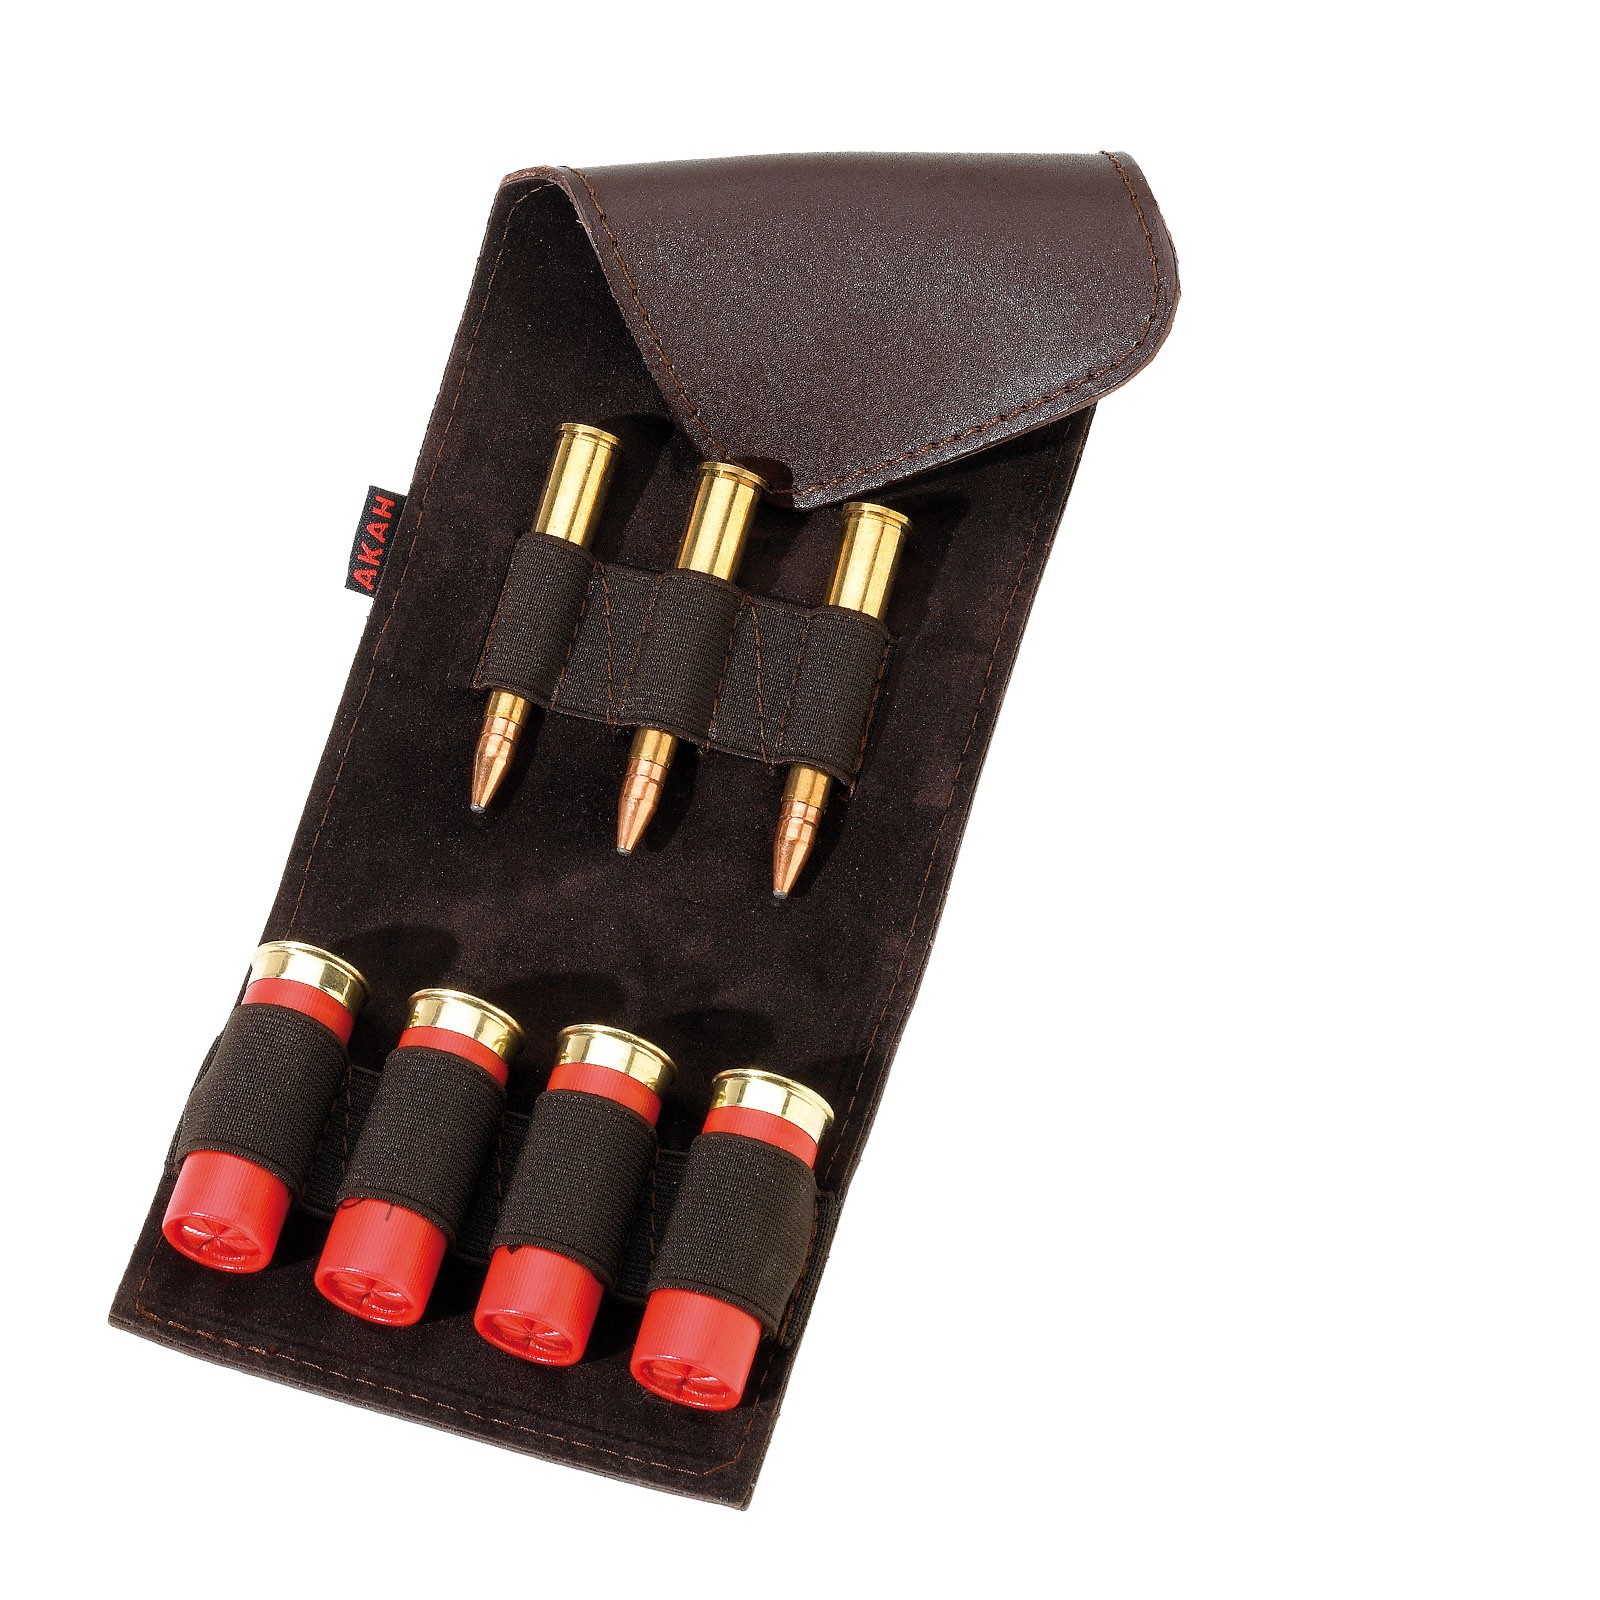 Akah Buck-Leather Poach 3 Chartr and 4 Shotshells with Clip